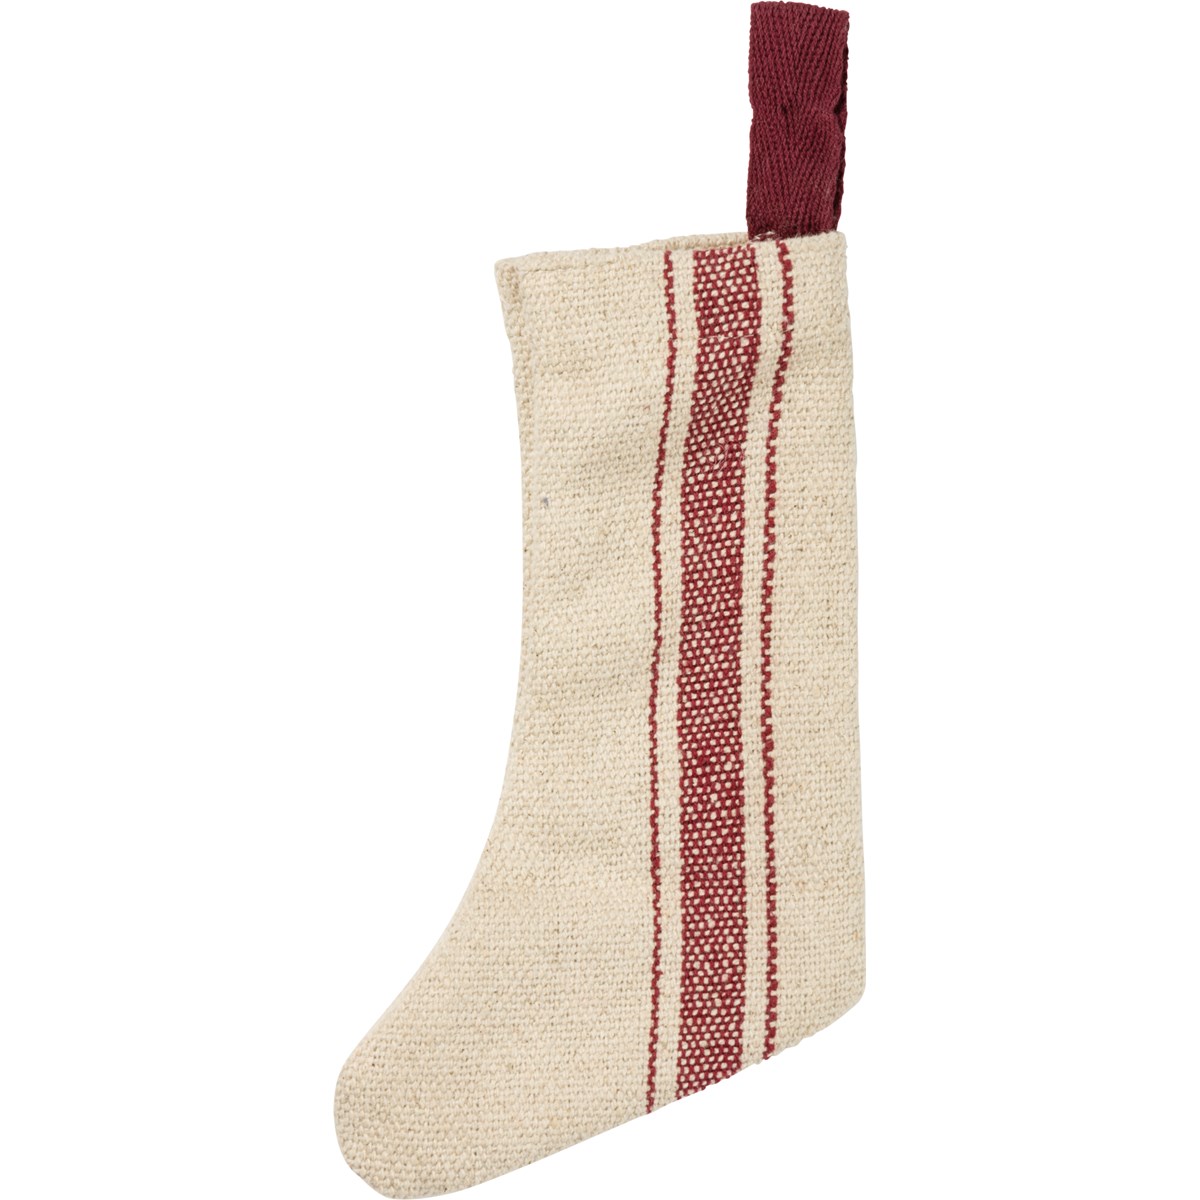 Striped Small Stocking - Cotton, Polyester